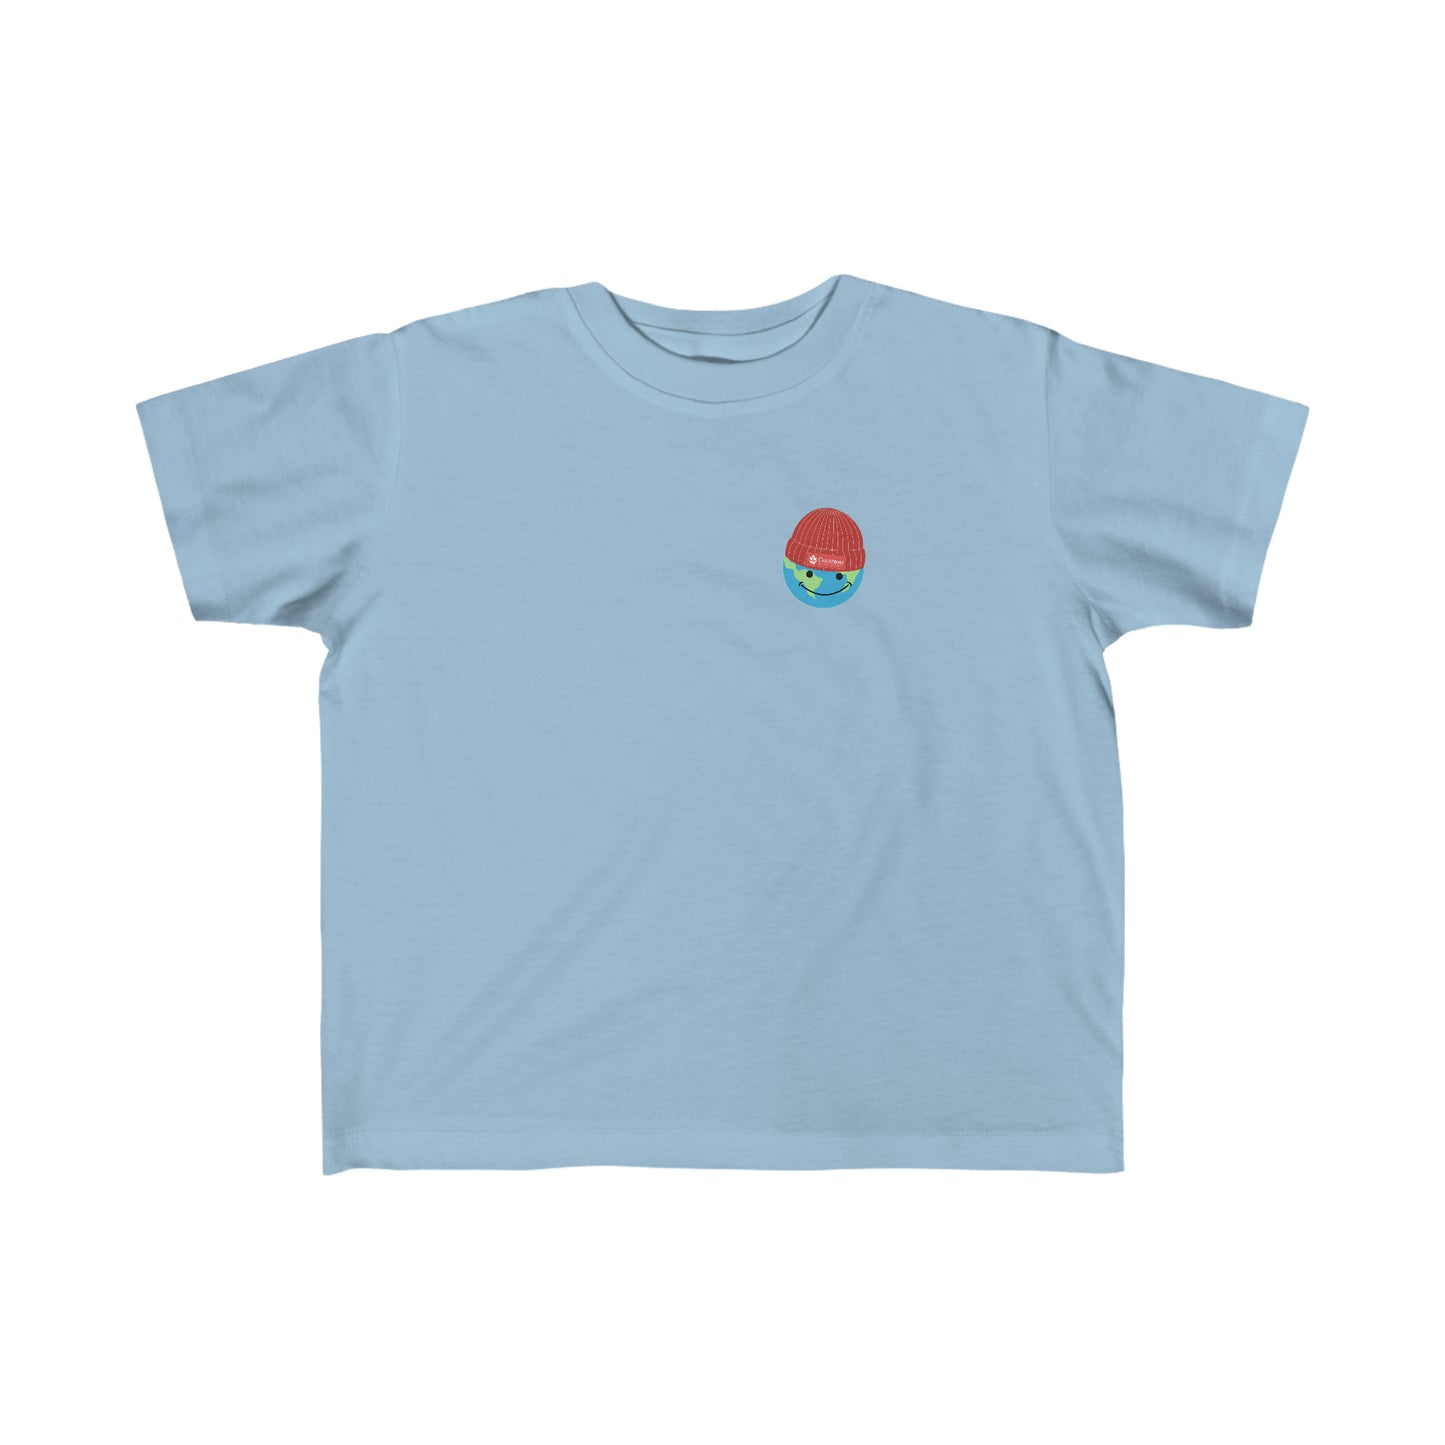 Toddler's Cousteau Shirt